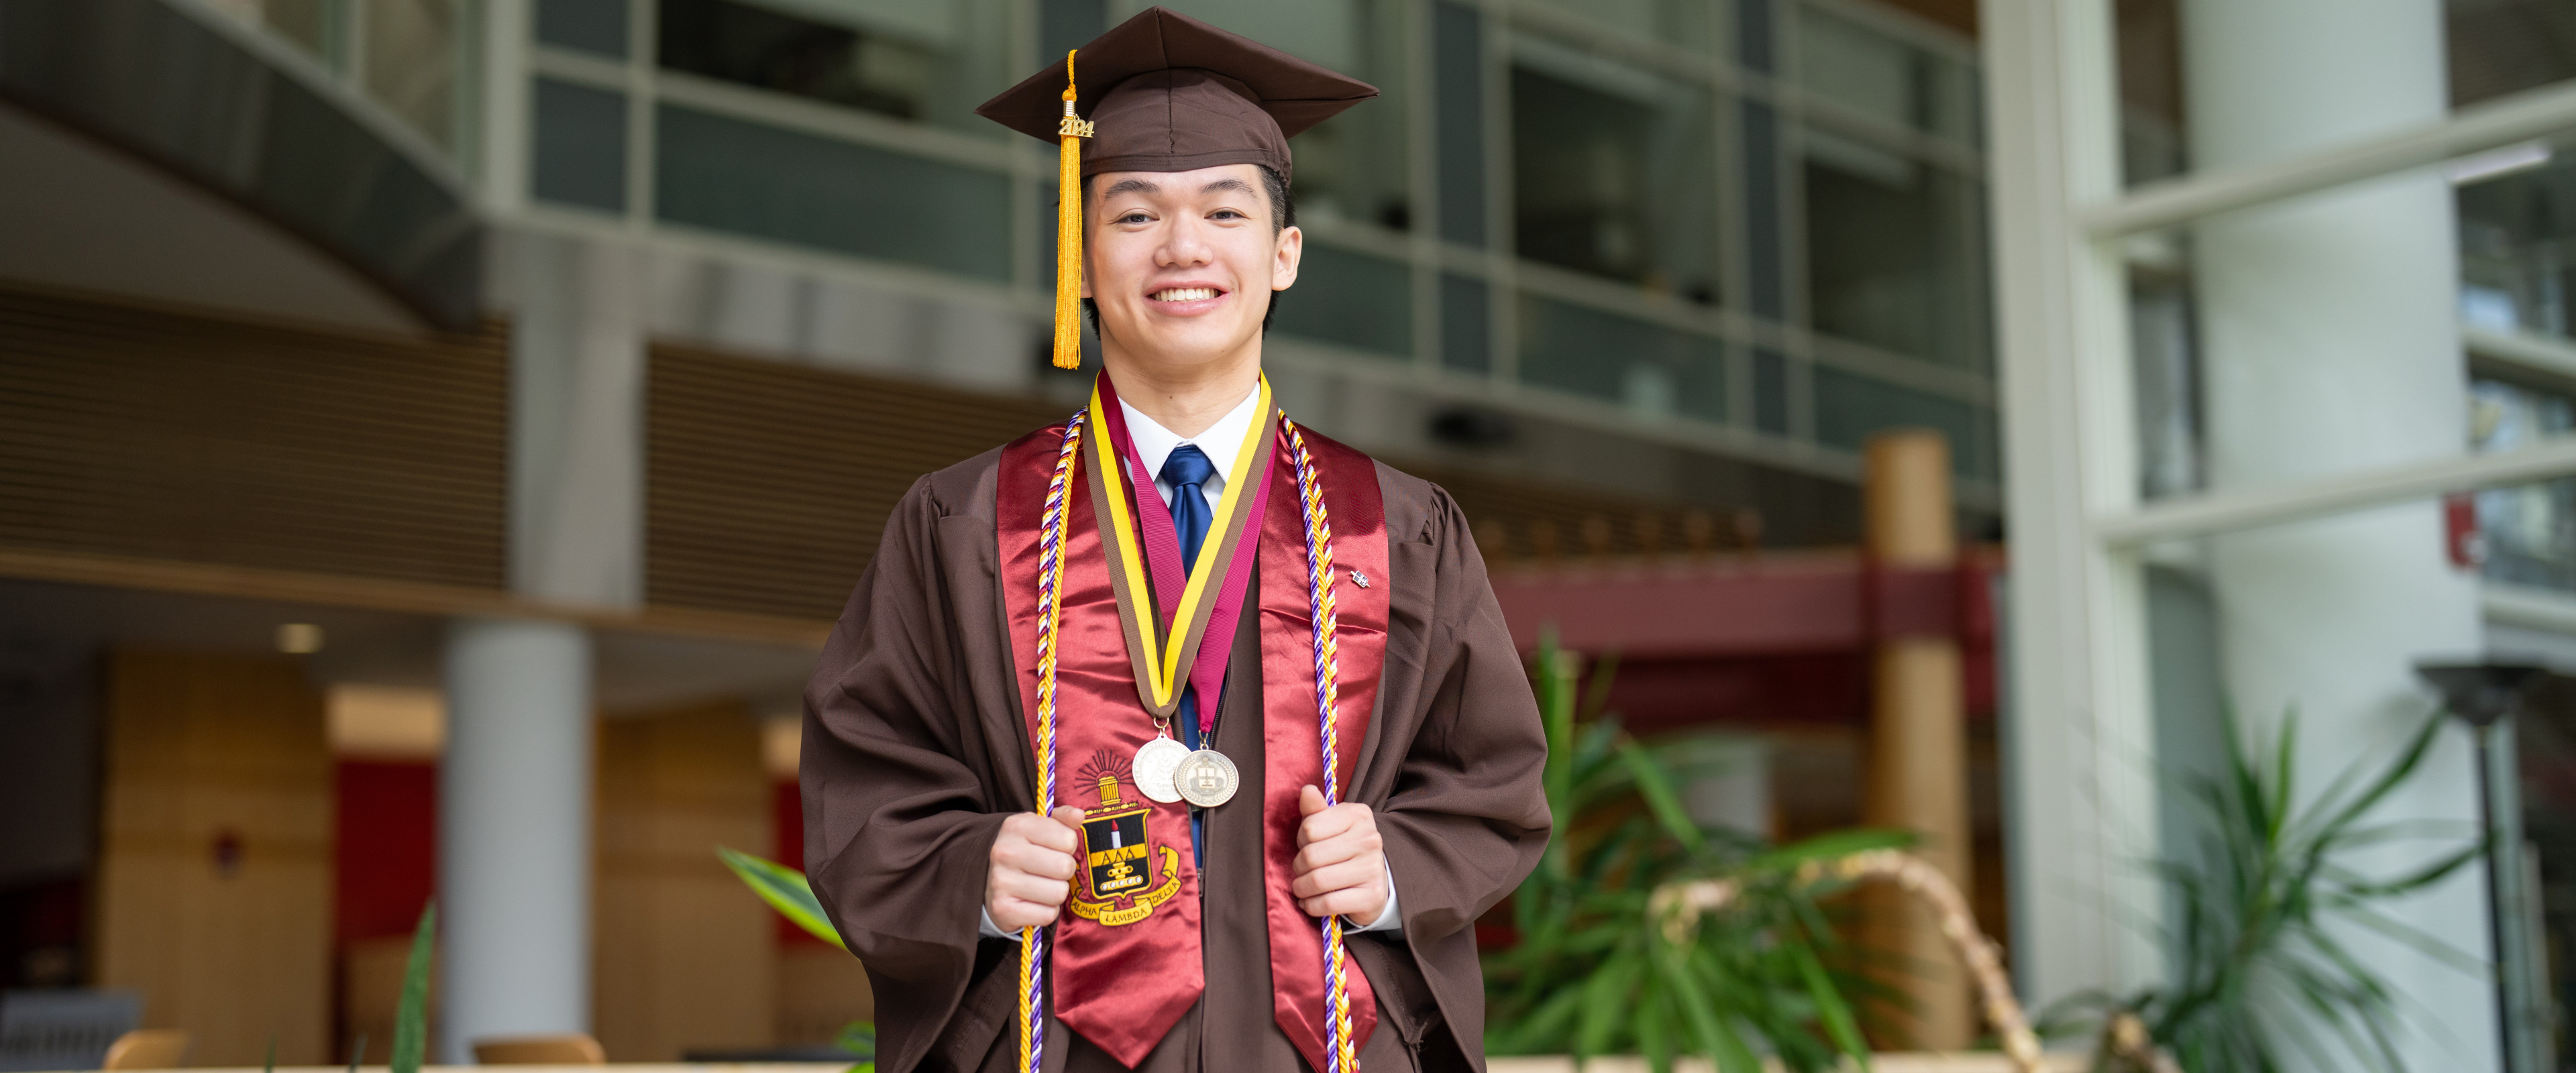 A portrait of David Le in his graduation cap and gown.